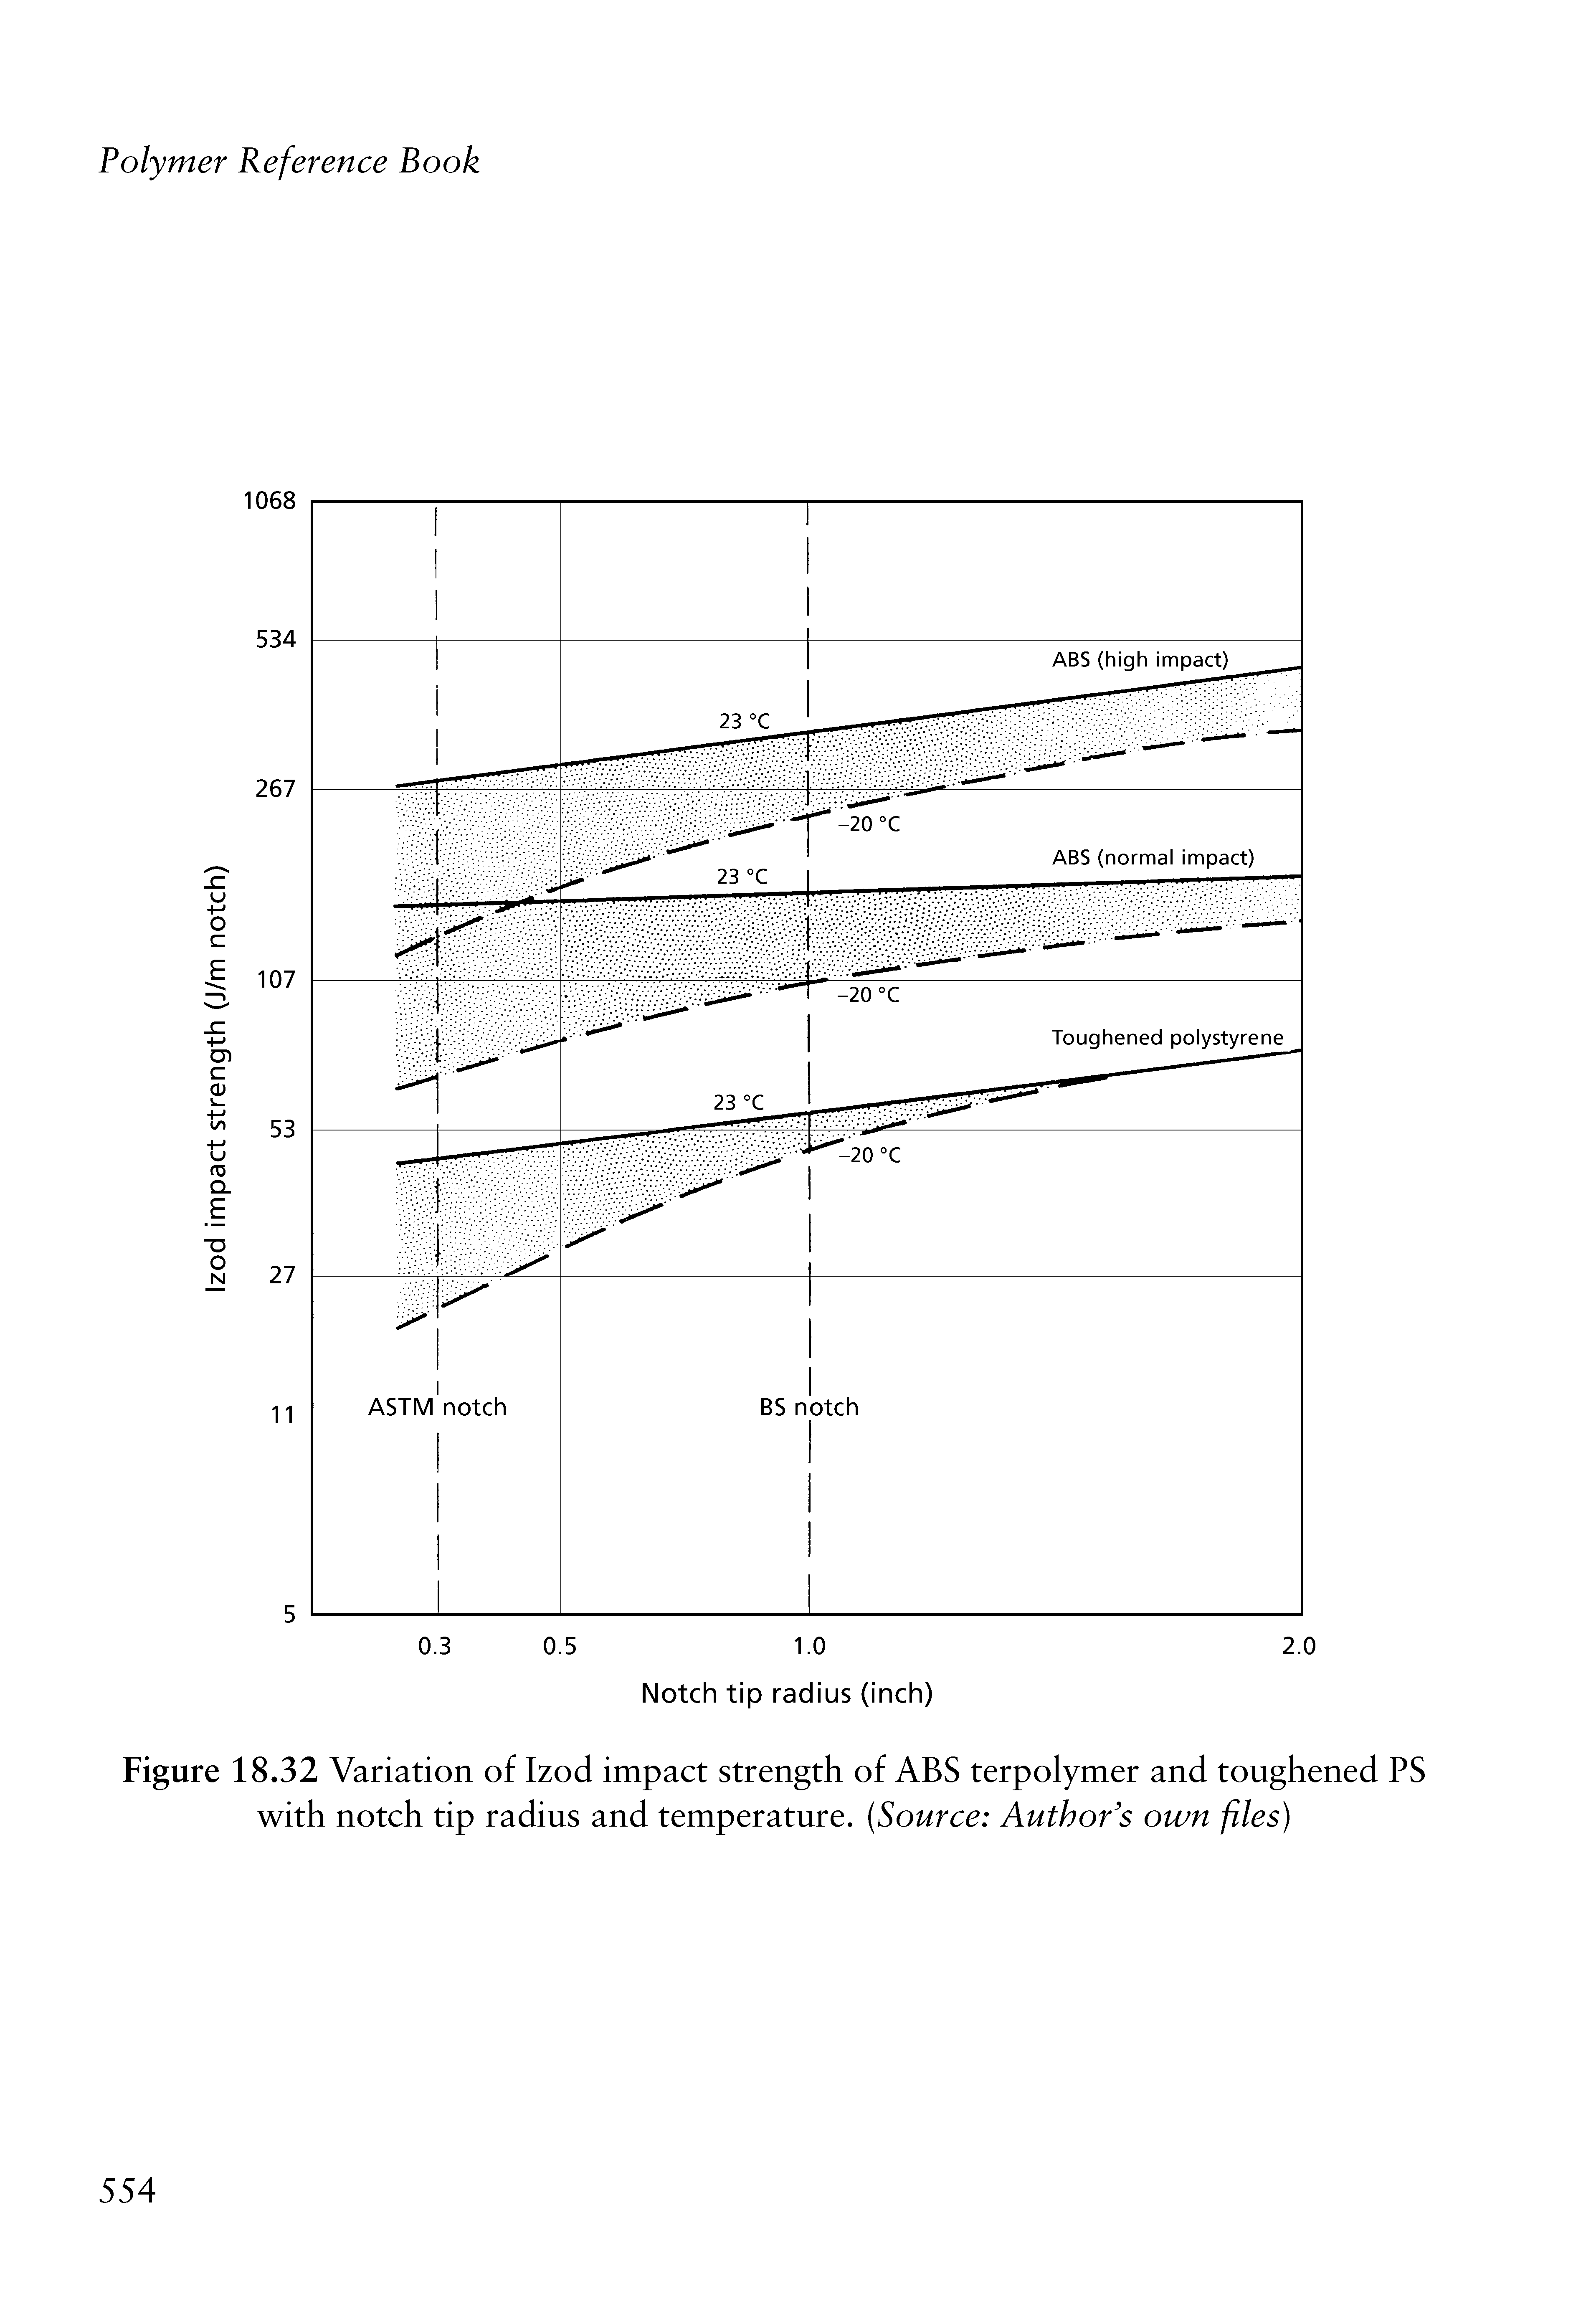 Figure 18.32 Variation of Izod impact strength of ABS terpolymer and toughened PS with notch tip radius and temperature. [Source Author s own files)...